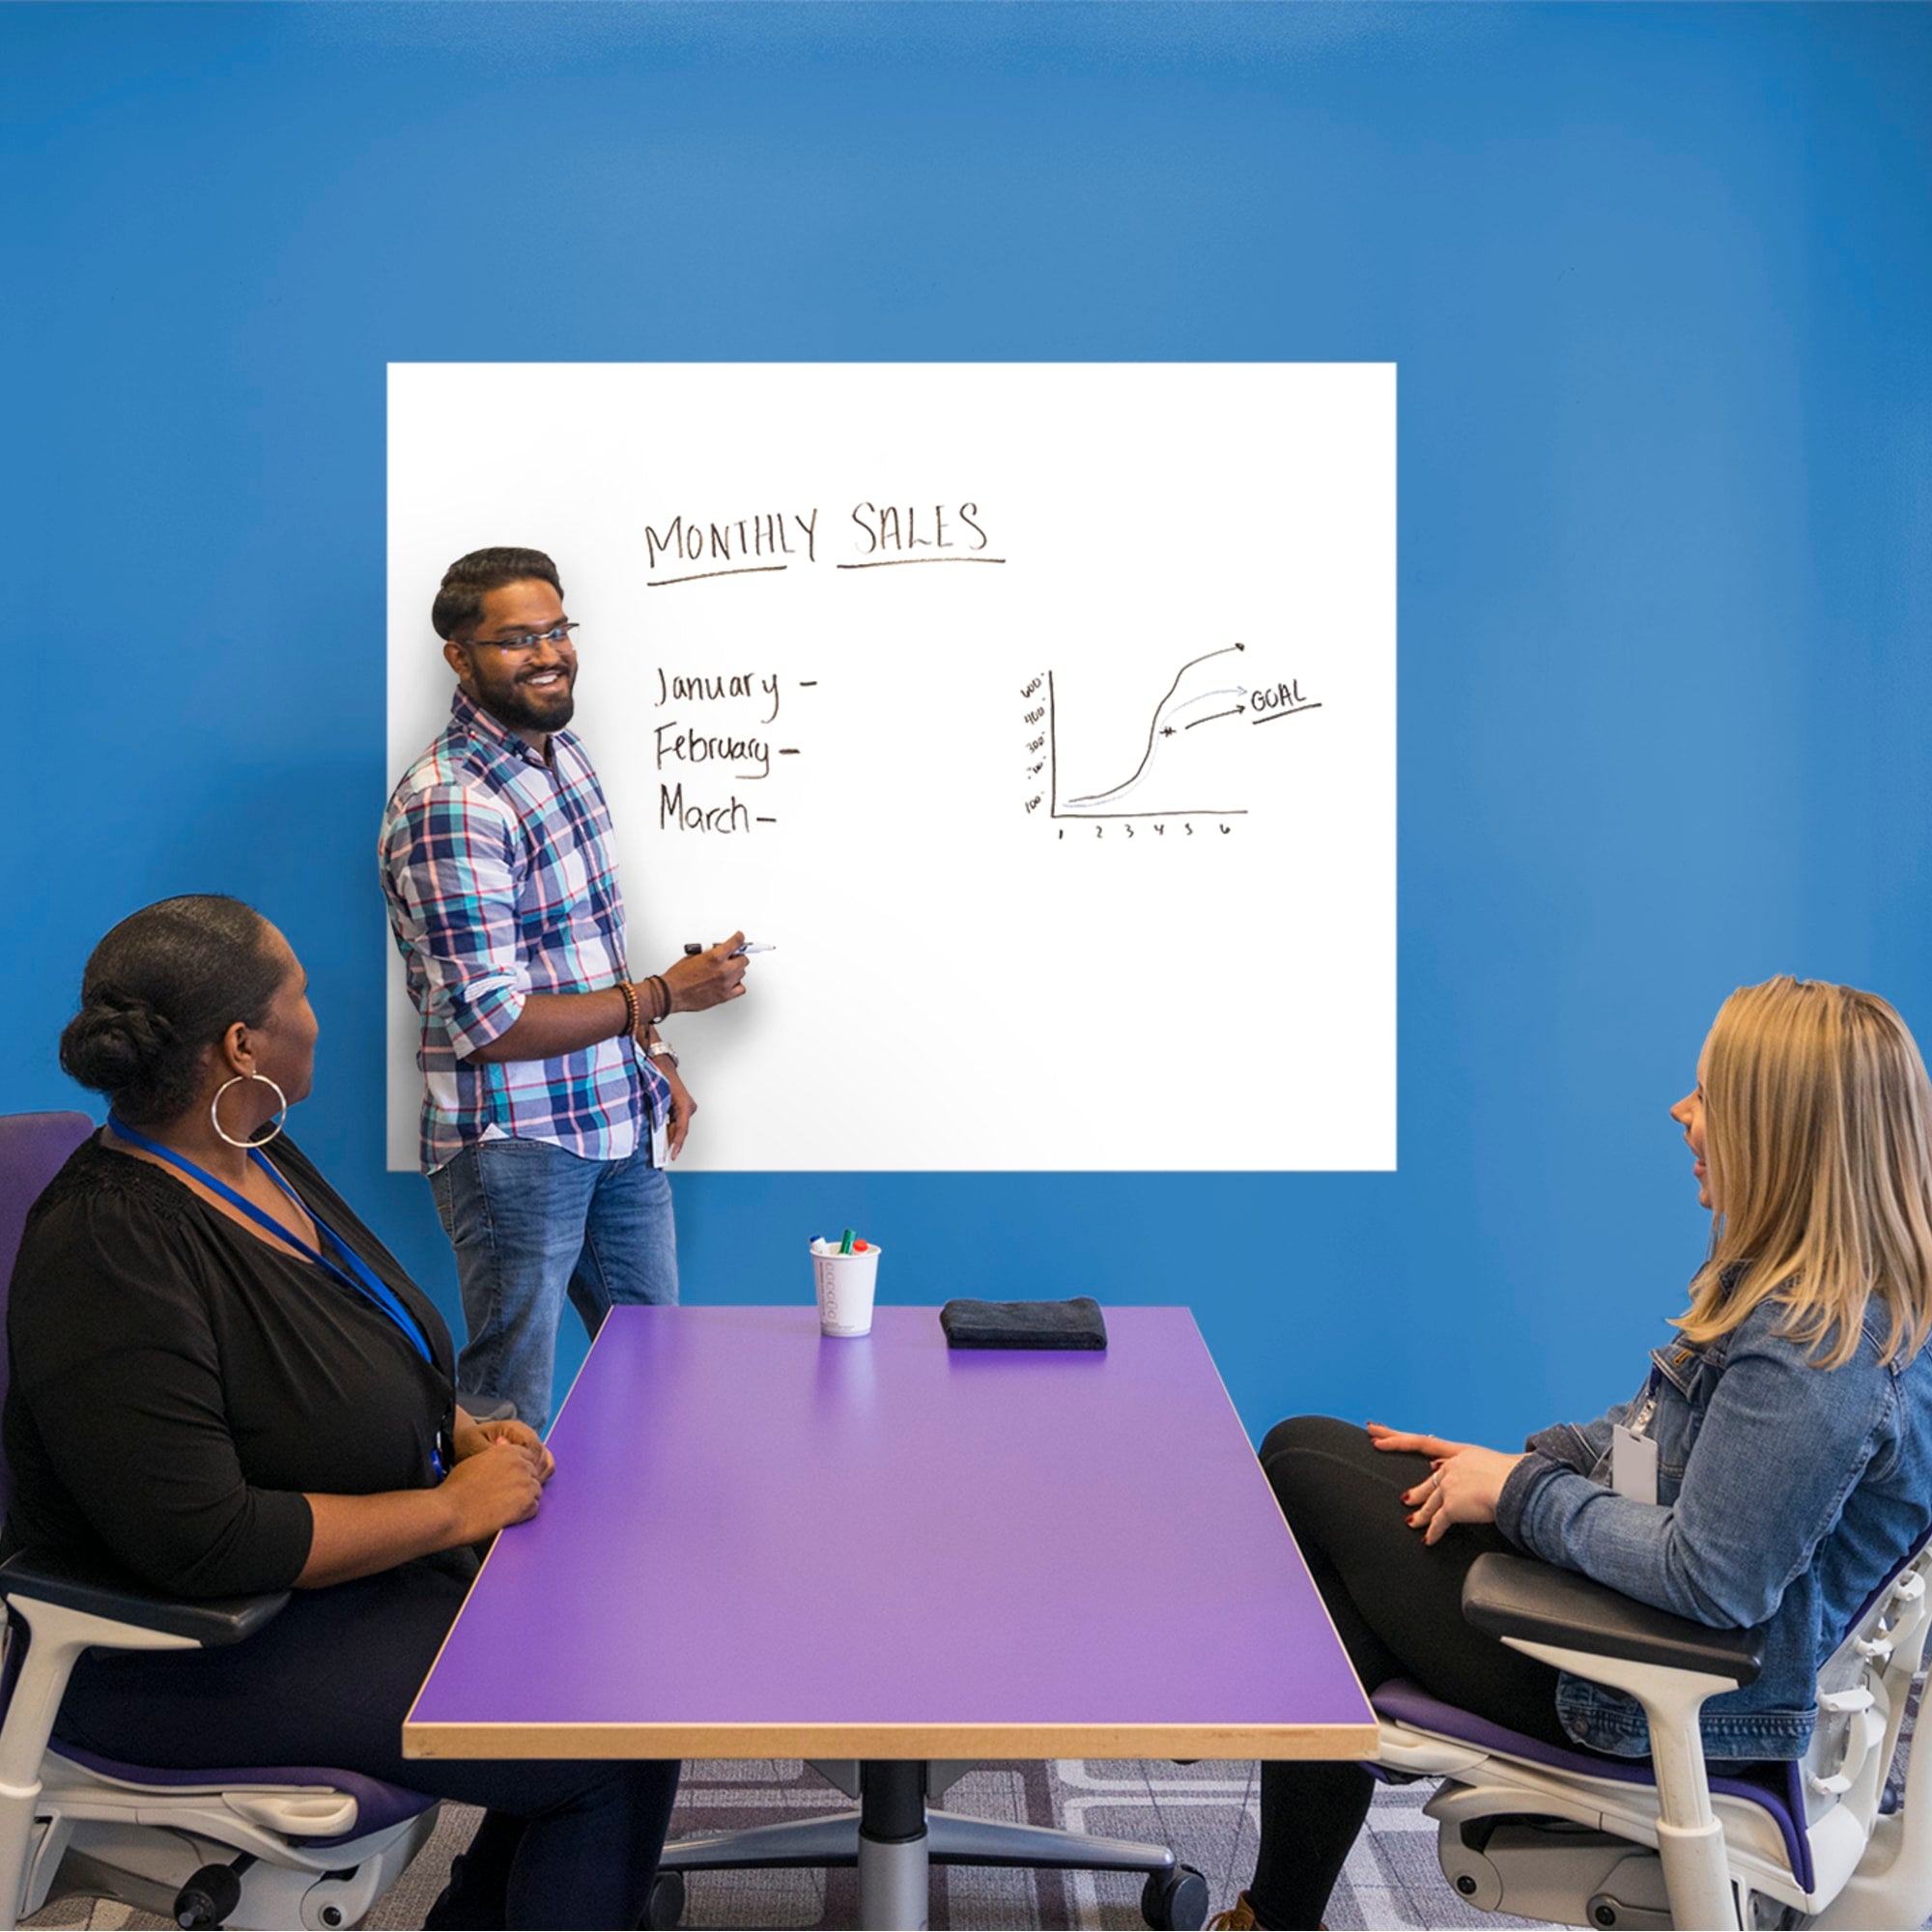 Whiteboard: Giant - Removable Dry Erase Vinyl Decal 60.0"W x 48.0"H by Fathead